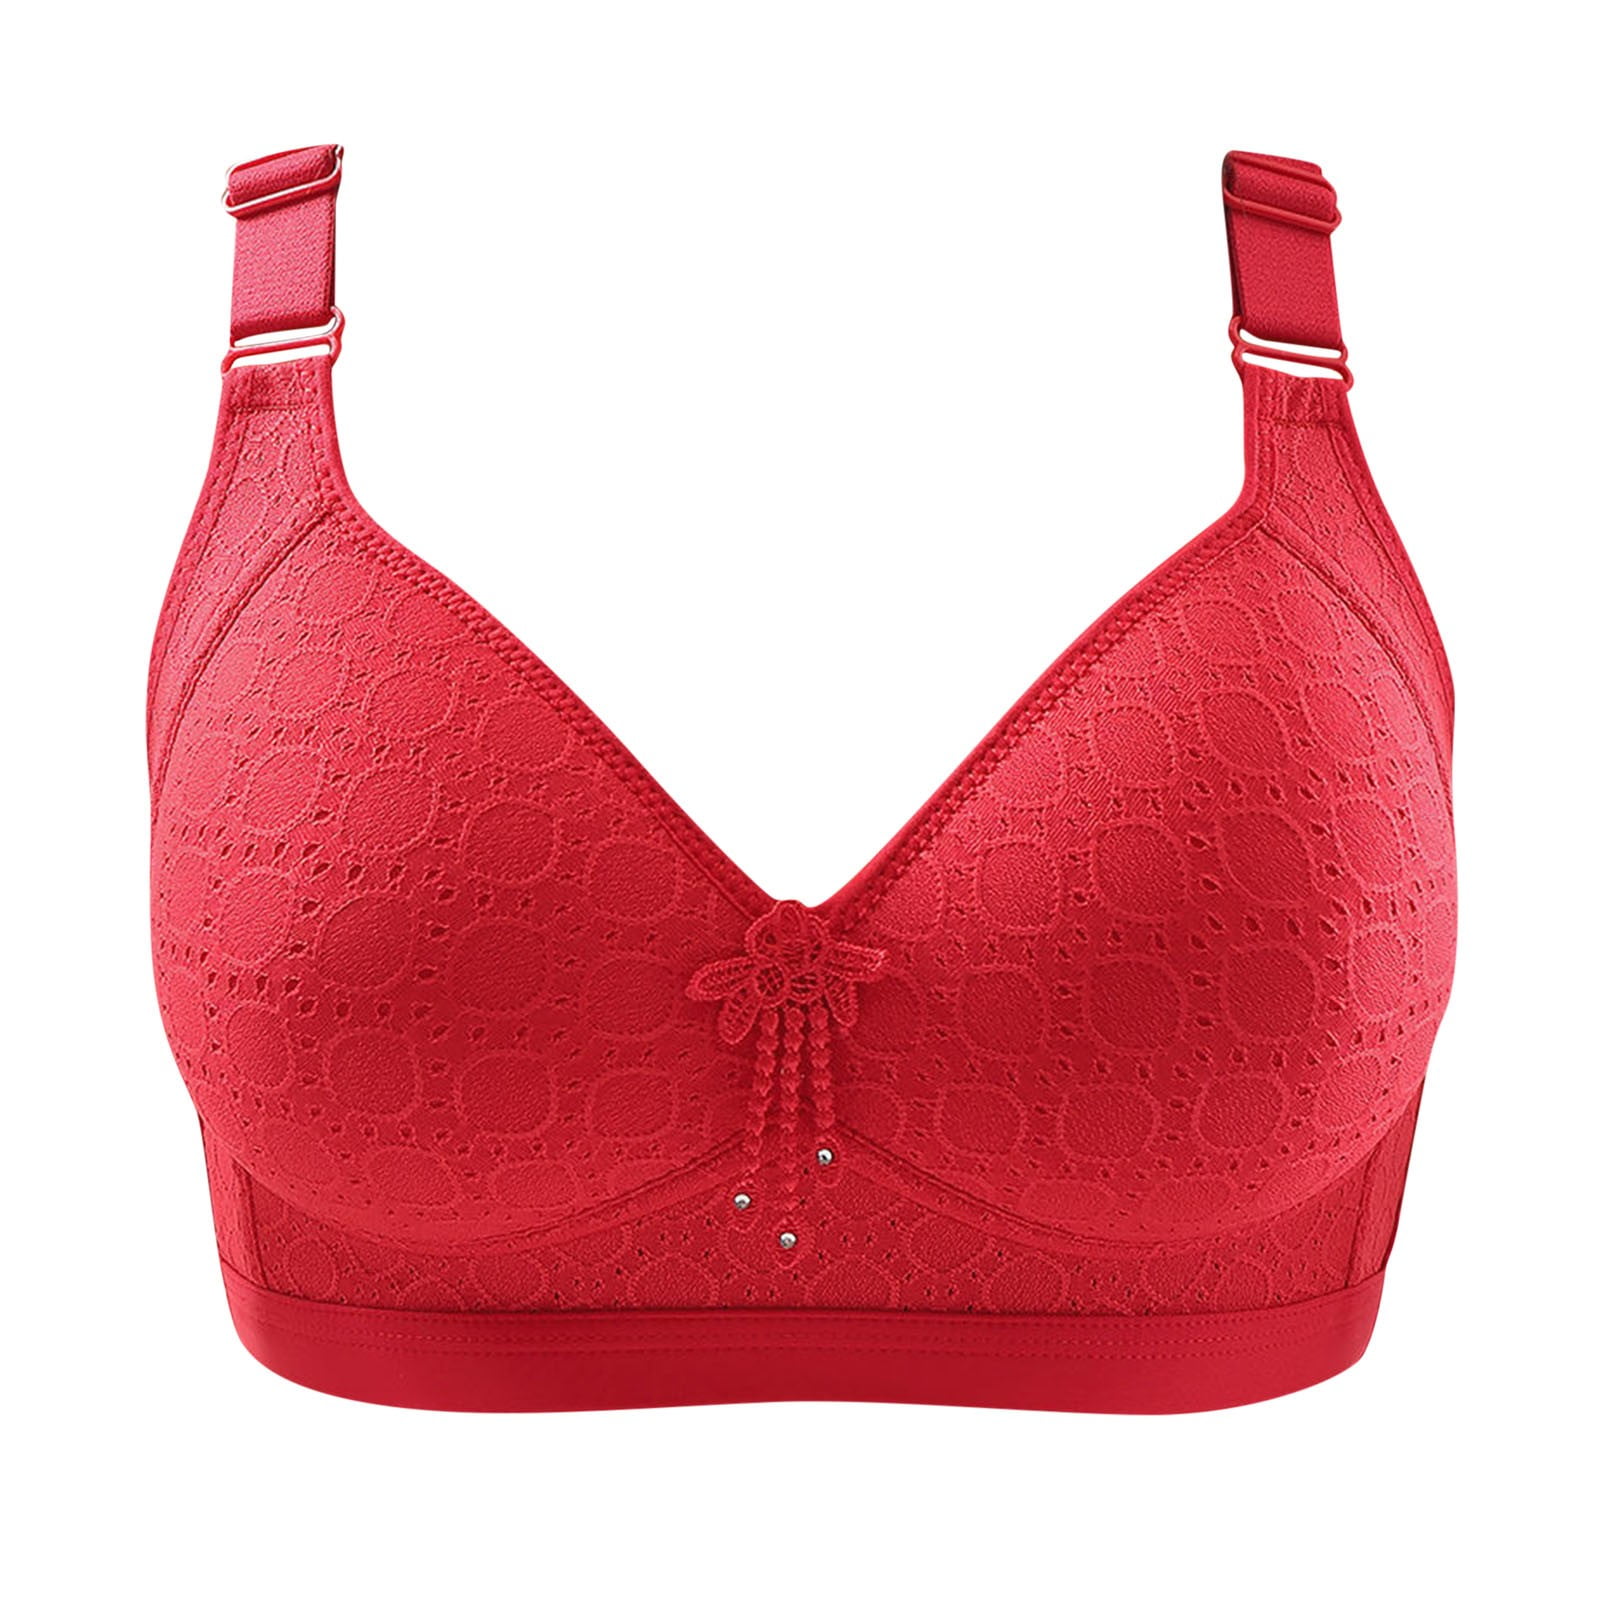 QUYUON Clearance Cotton Bras for Women Wirefree Comfortable